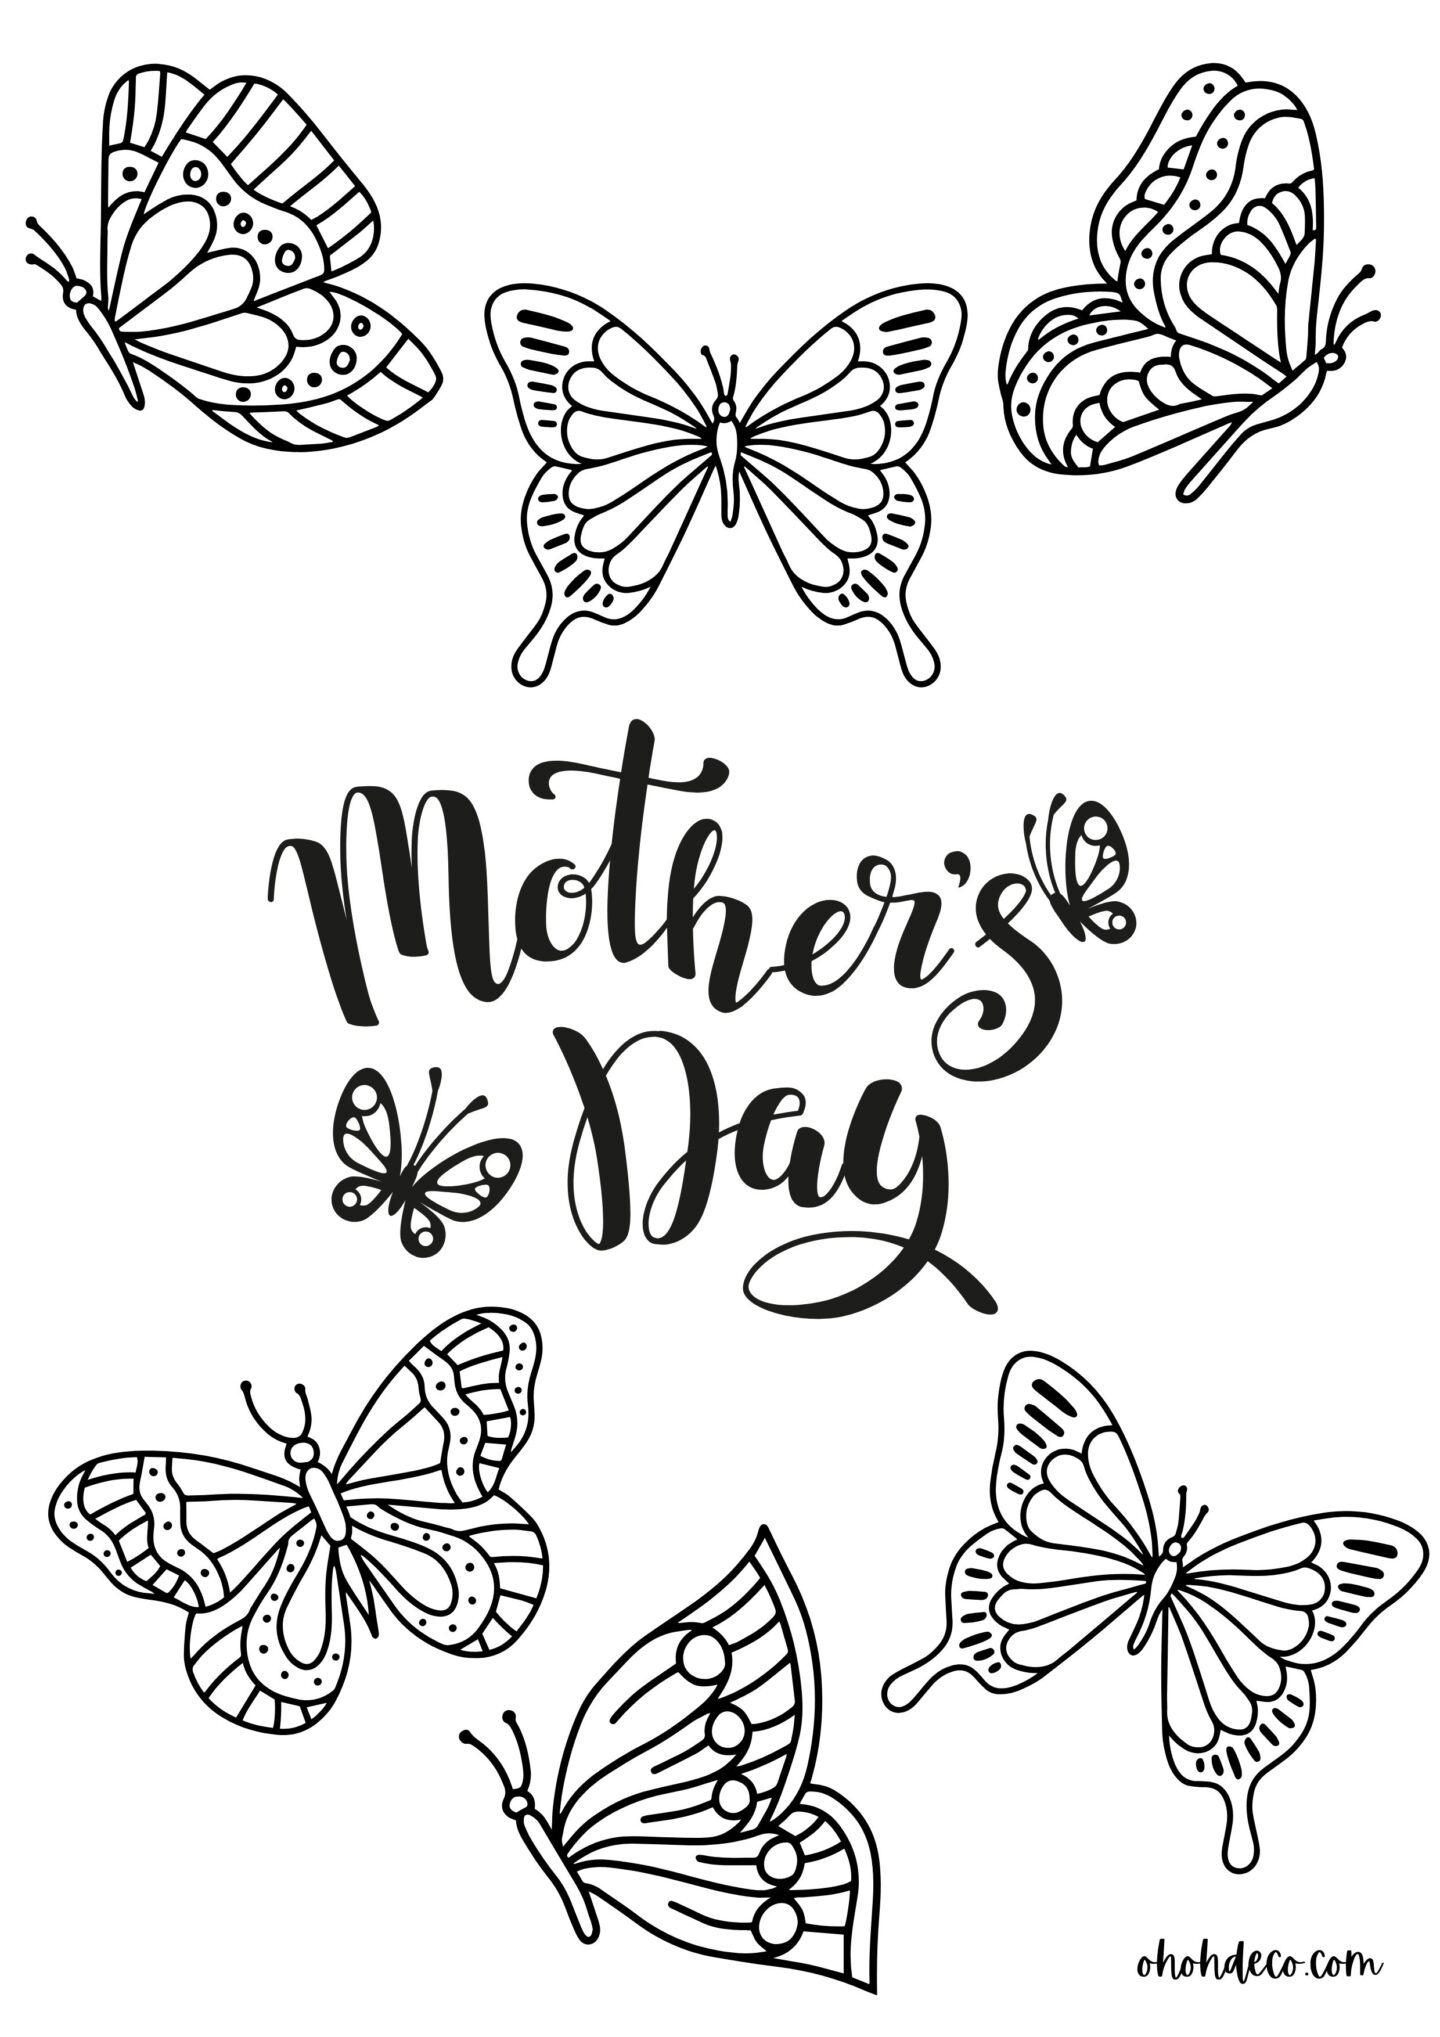 mother's day free coloring page